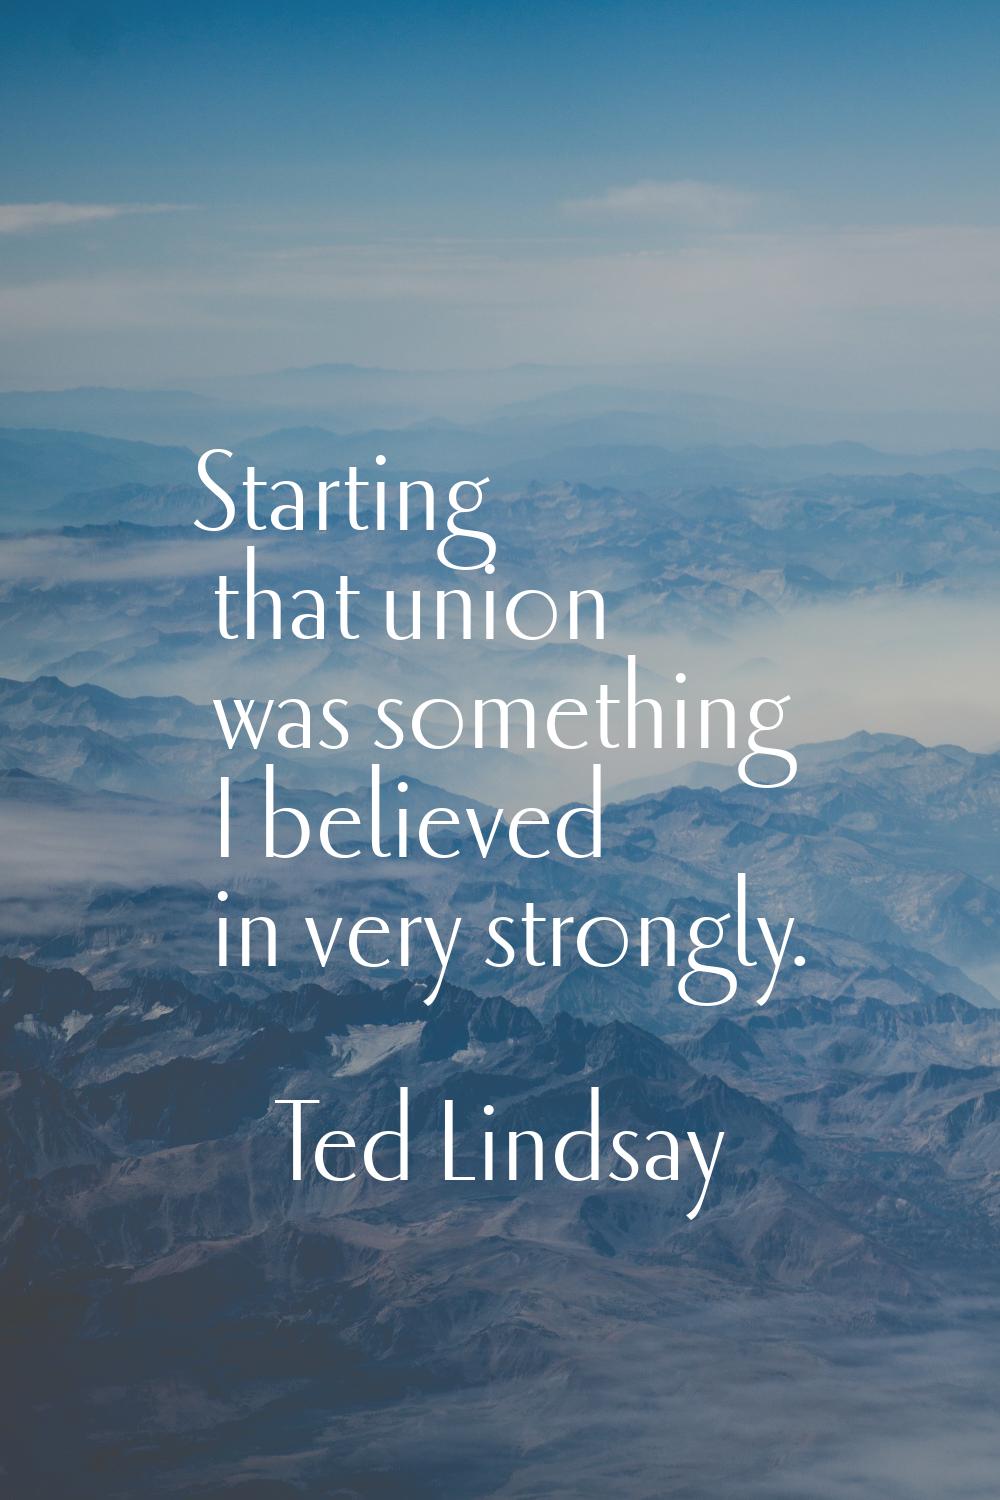 Starting that union was something I believed in very strongly.